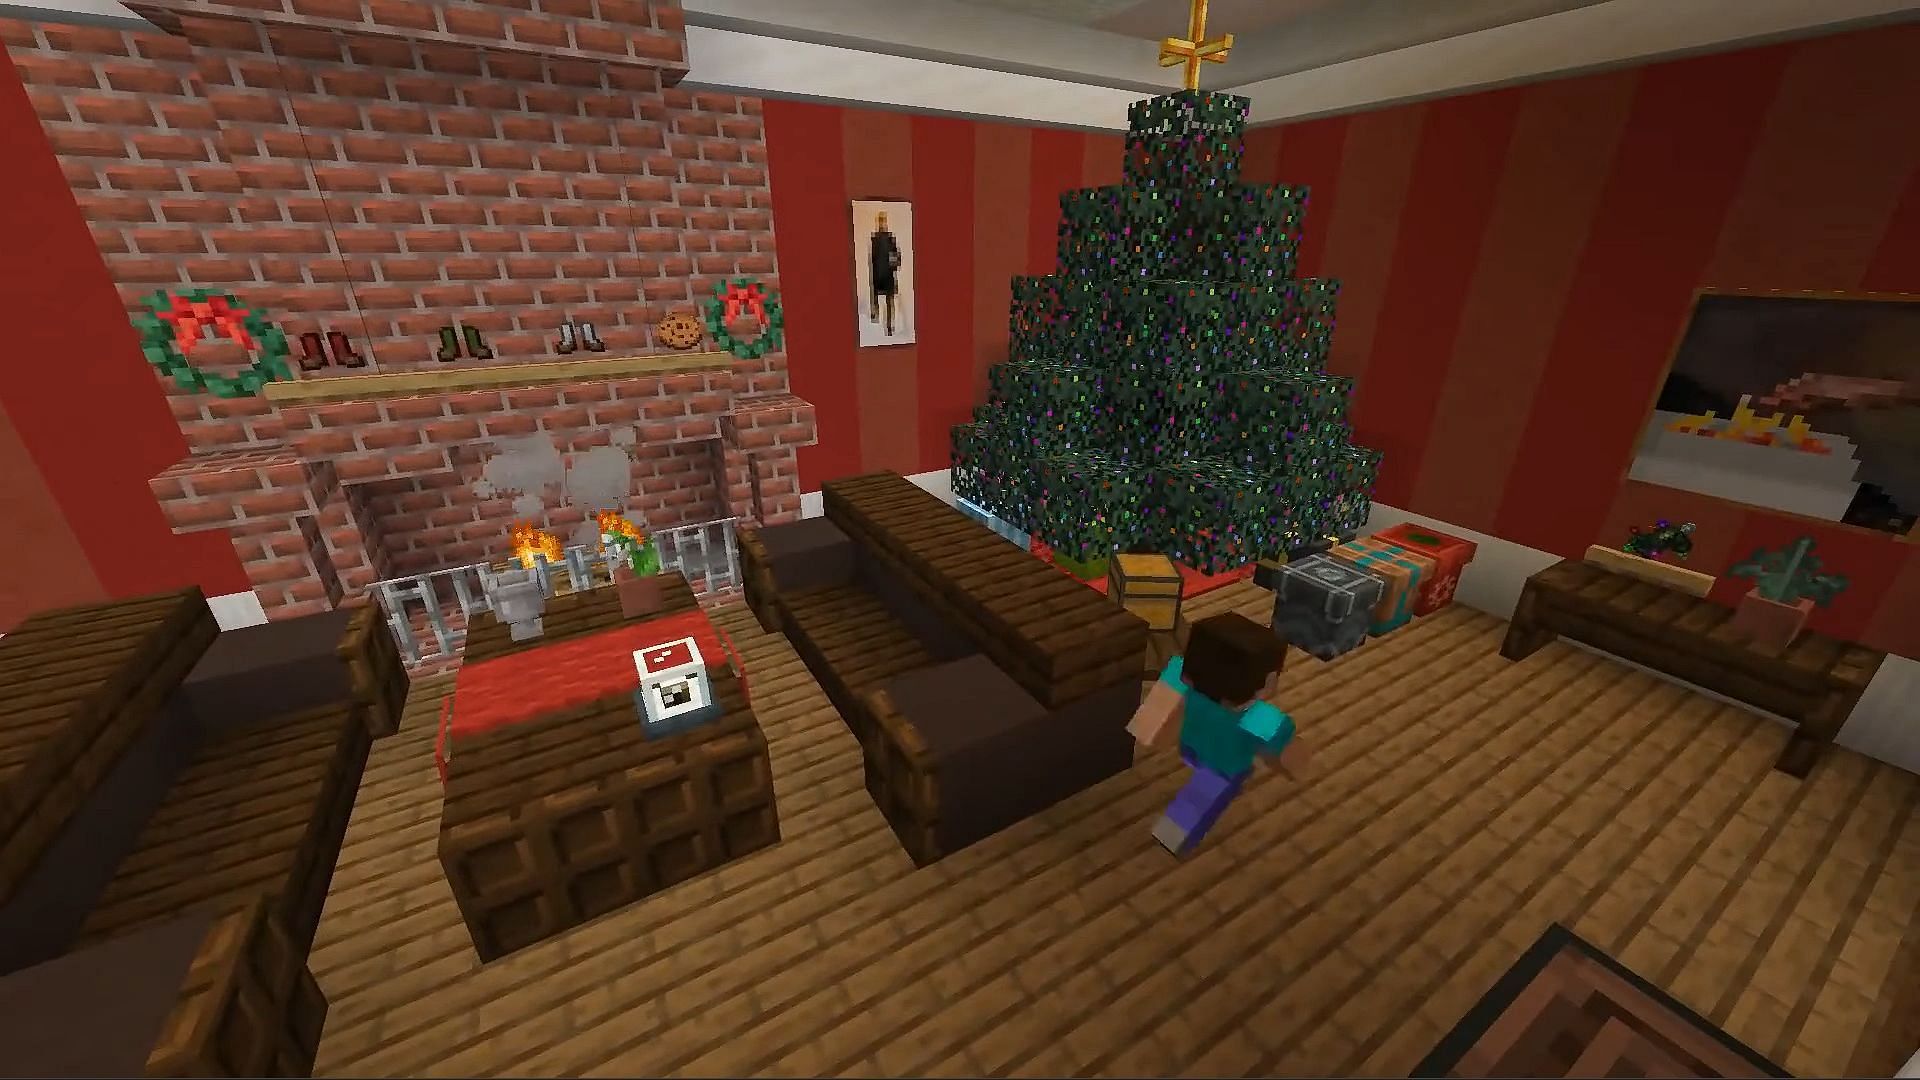 This Minecraft mod is most famous for its Christmas features and decorations (Image via YouTube/Supplementaries)